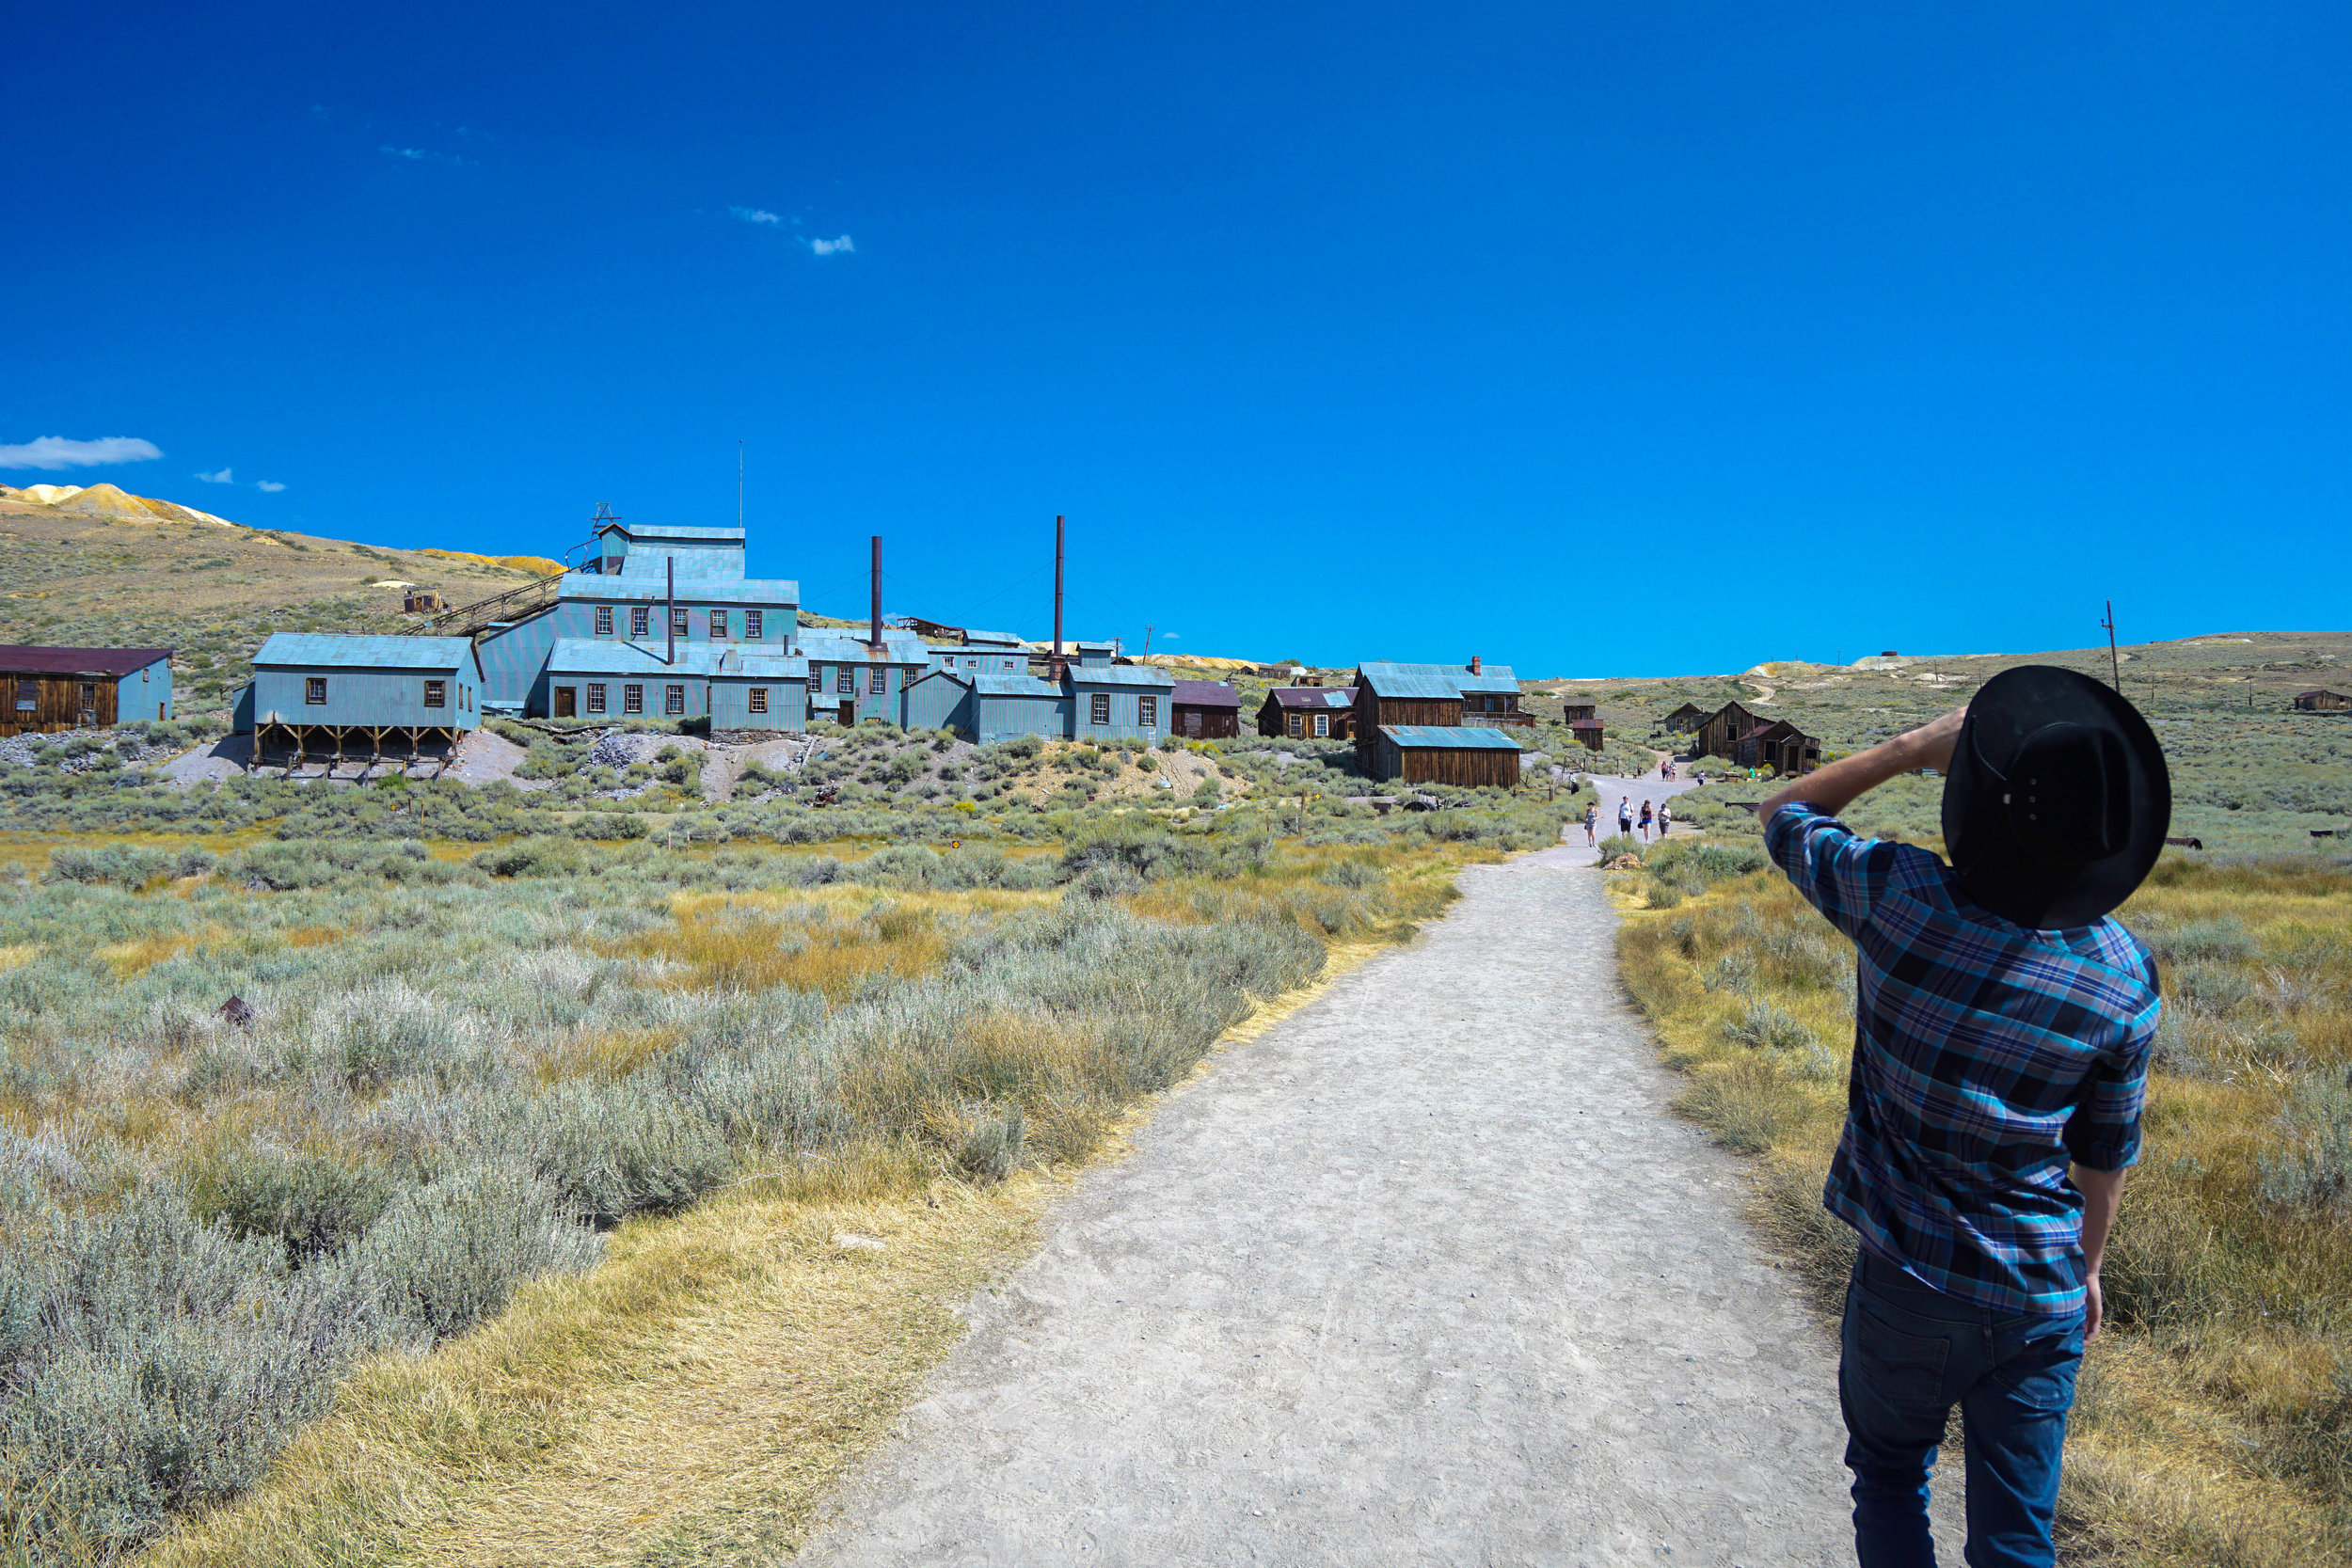 100 miles north we land in the notorious Ghost Town of Bodie. Bottoms up!